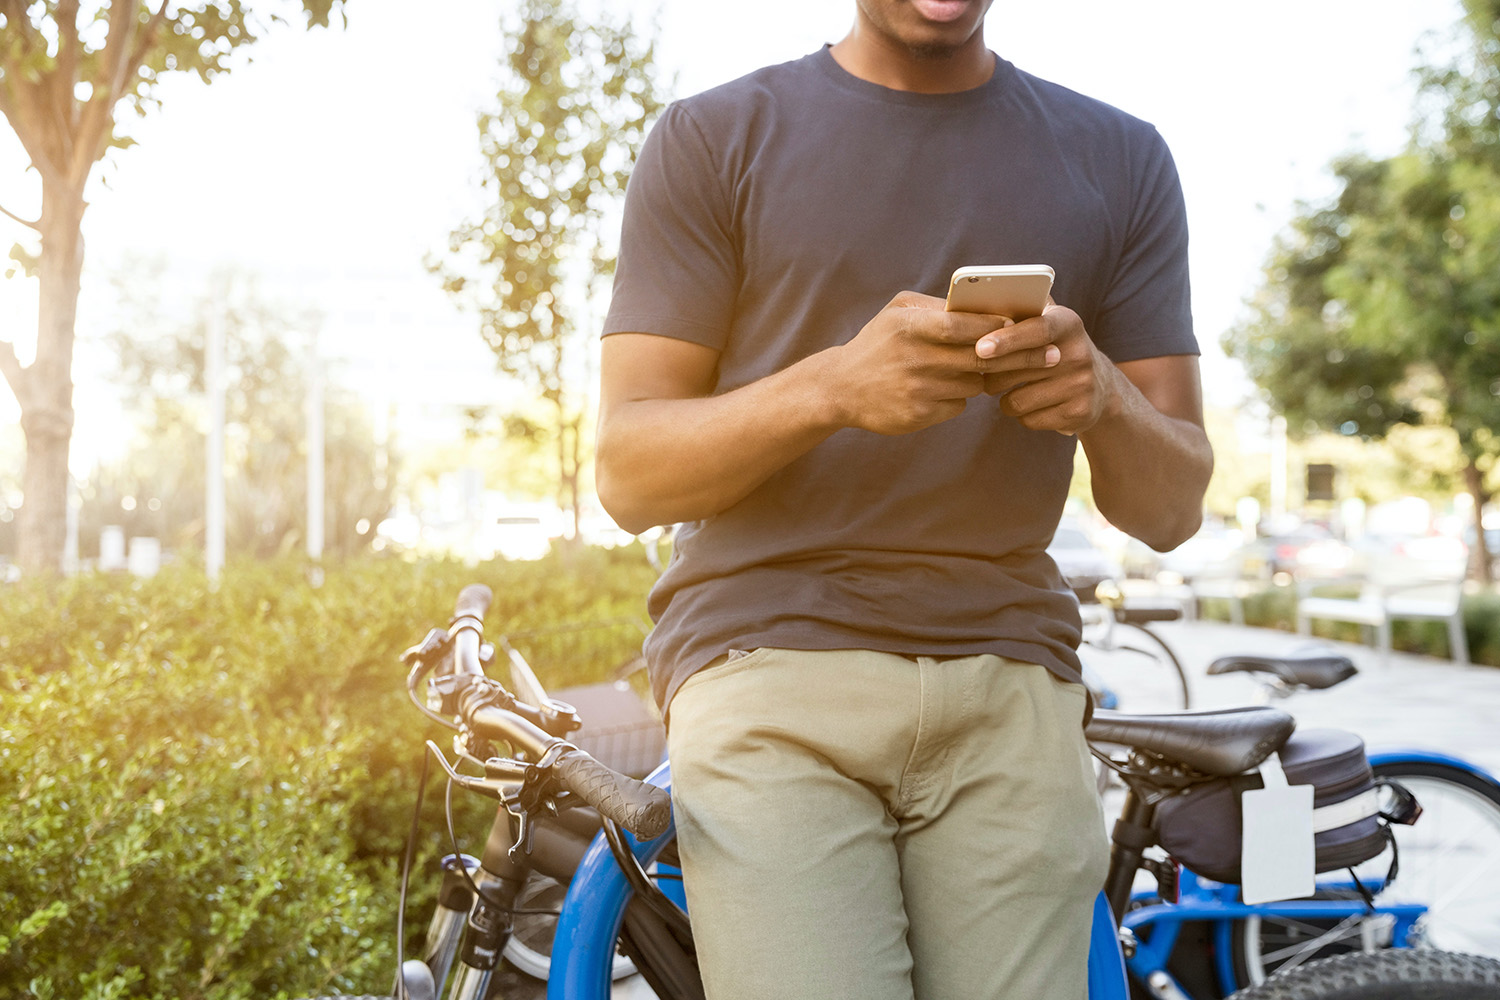 Man checking his phone while leaning on a bicycle